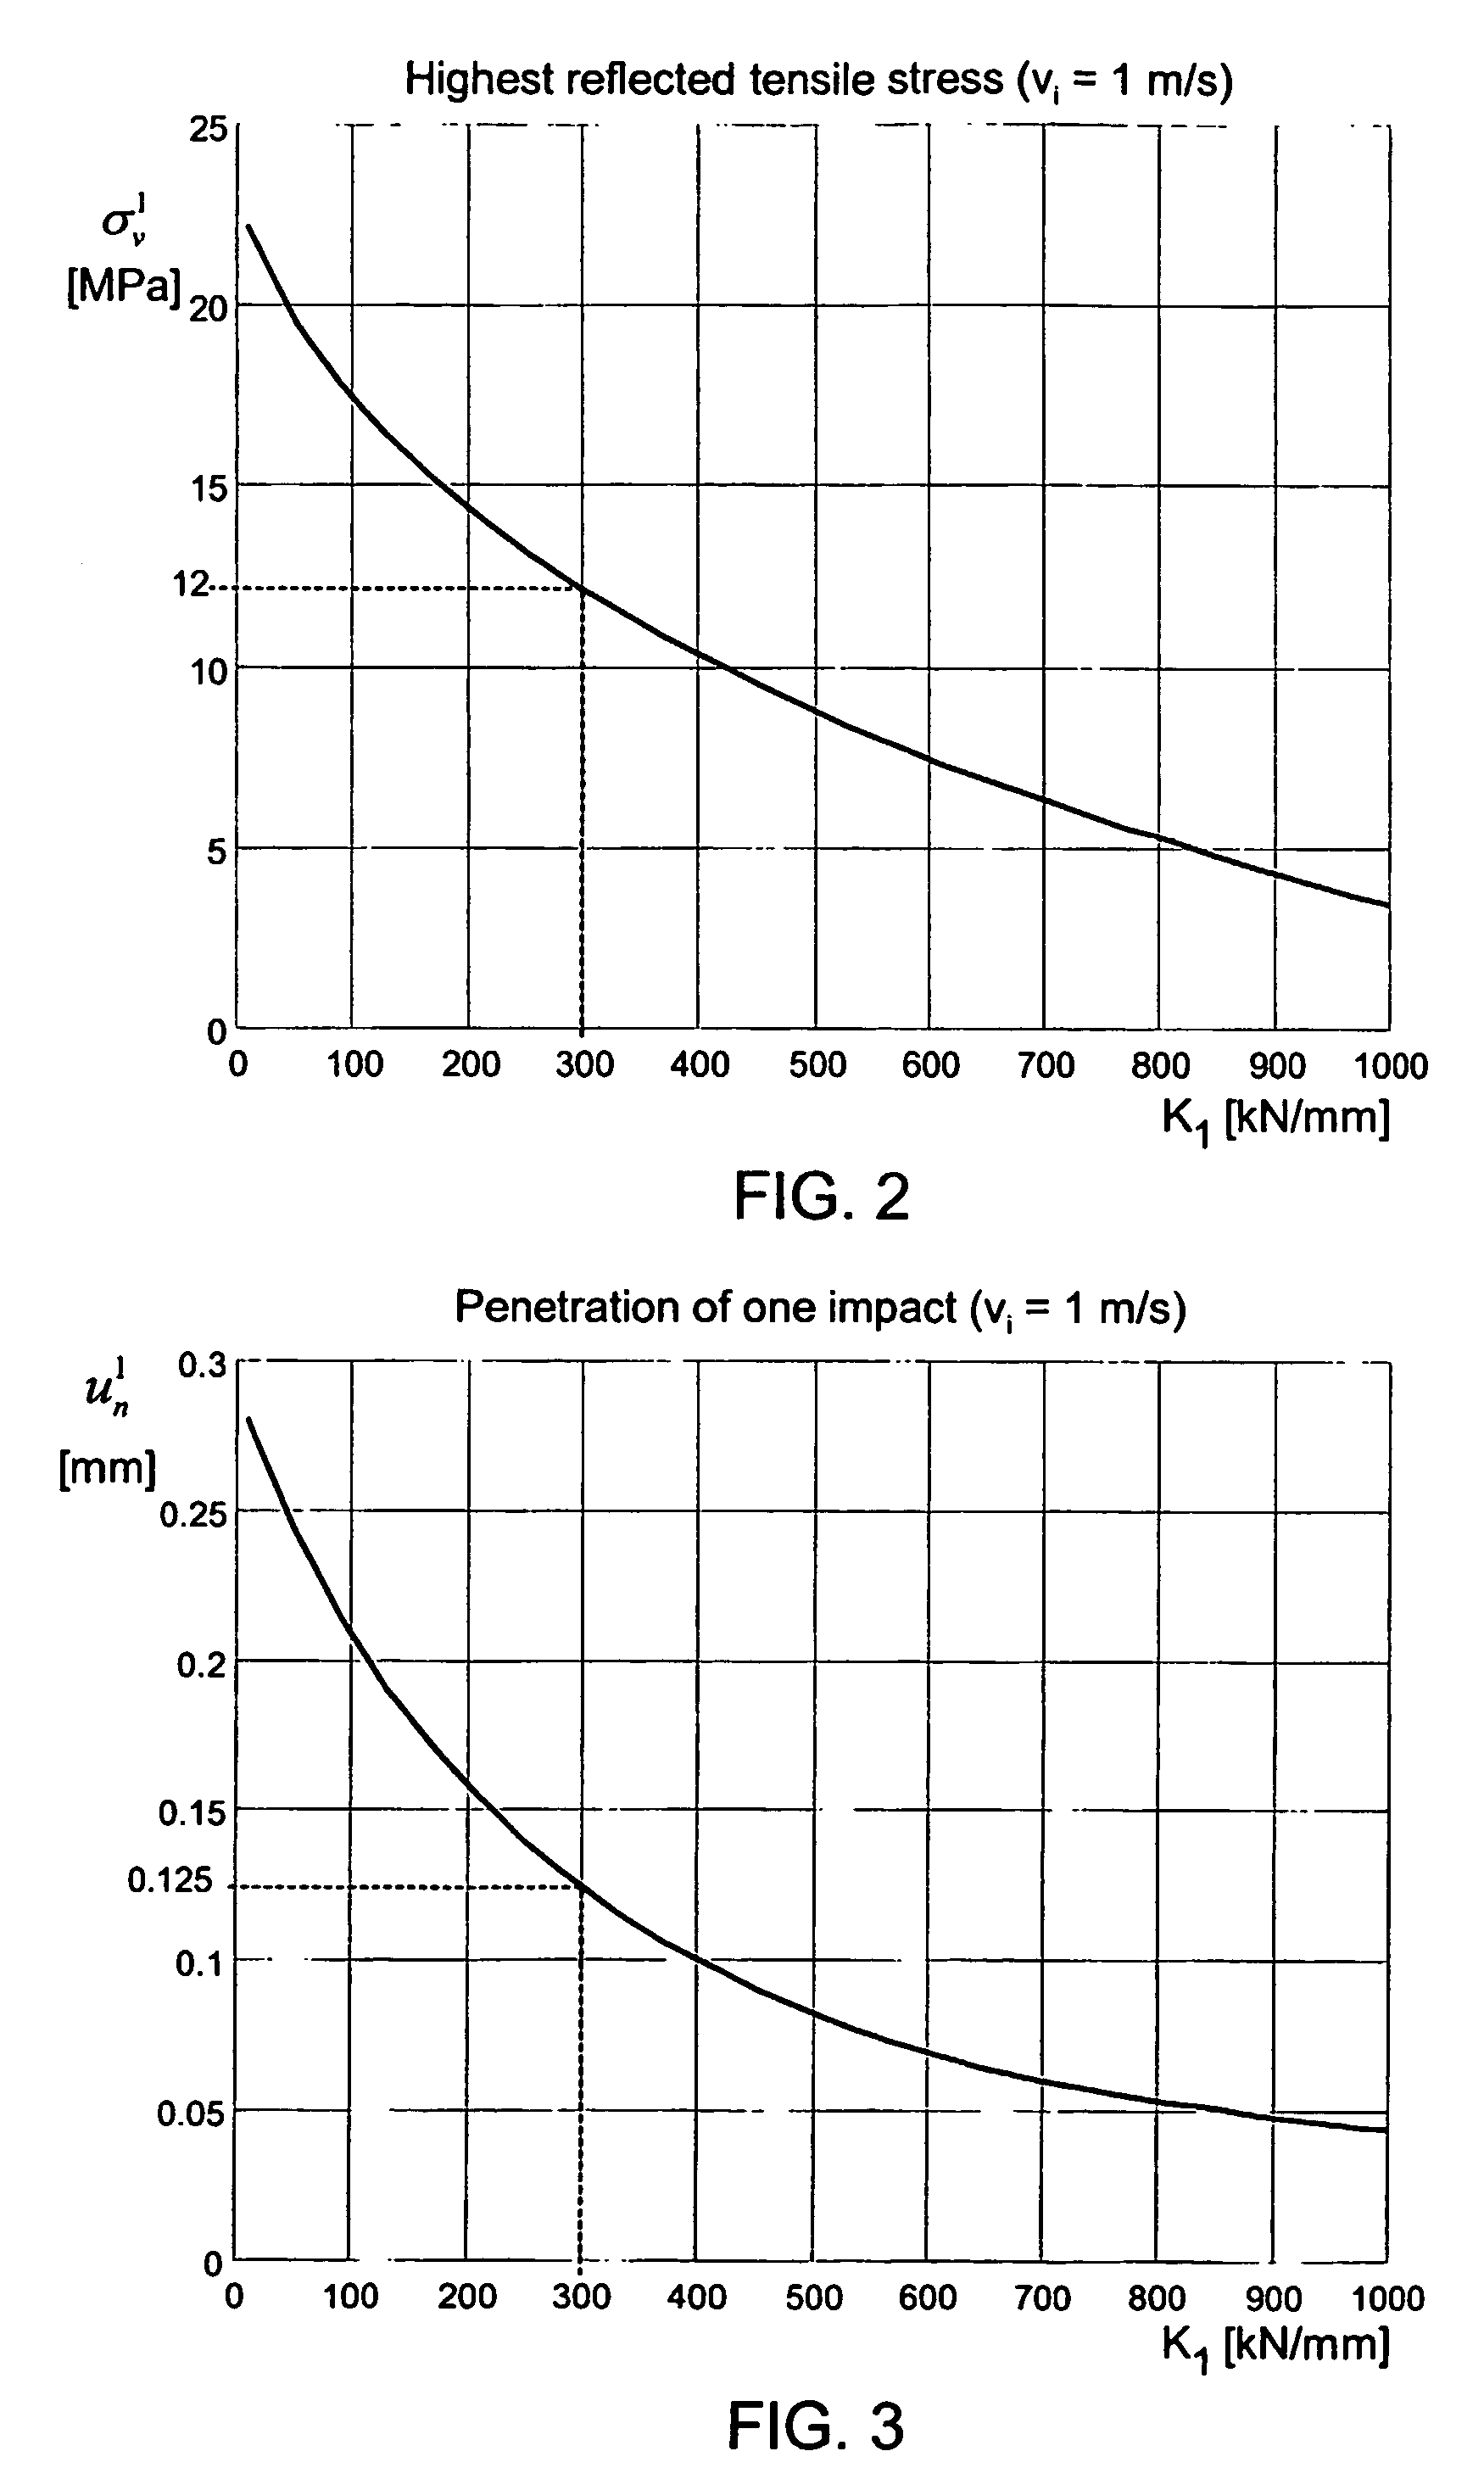 Method and arrangement of controlling of percussive drilling based on the stress level determined from the measured feed rate